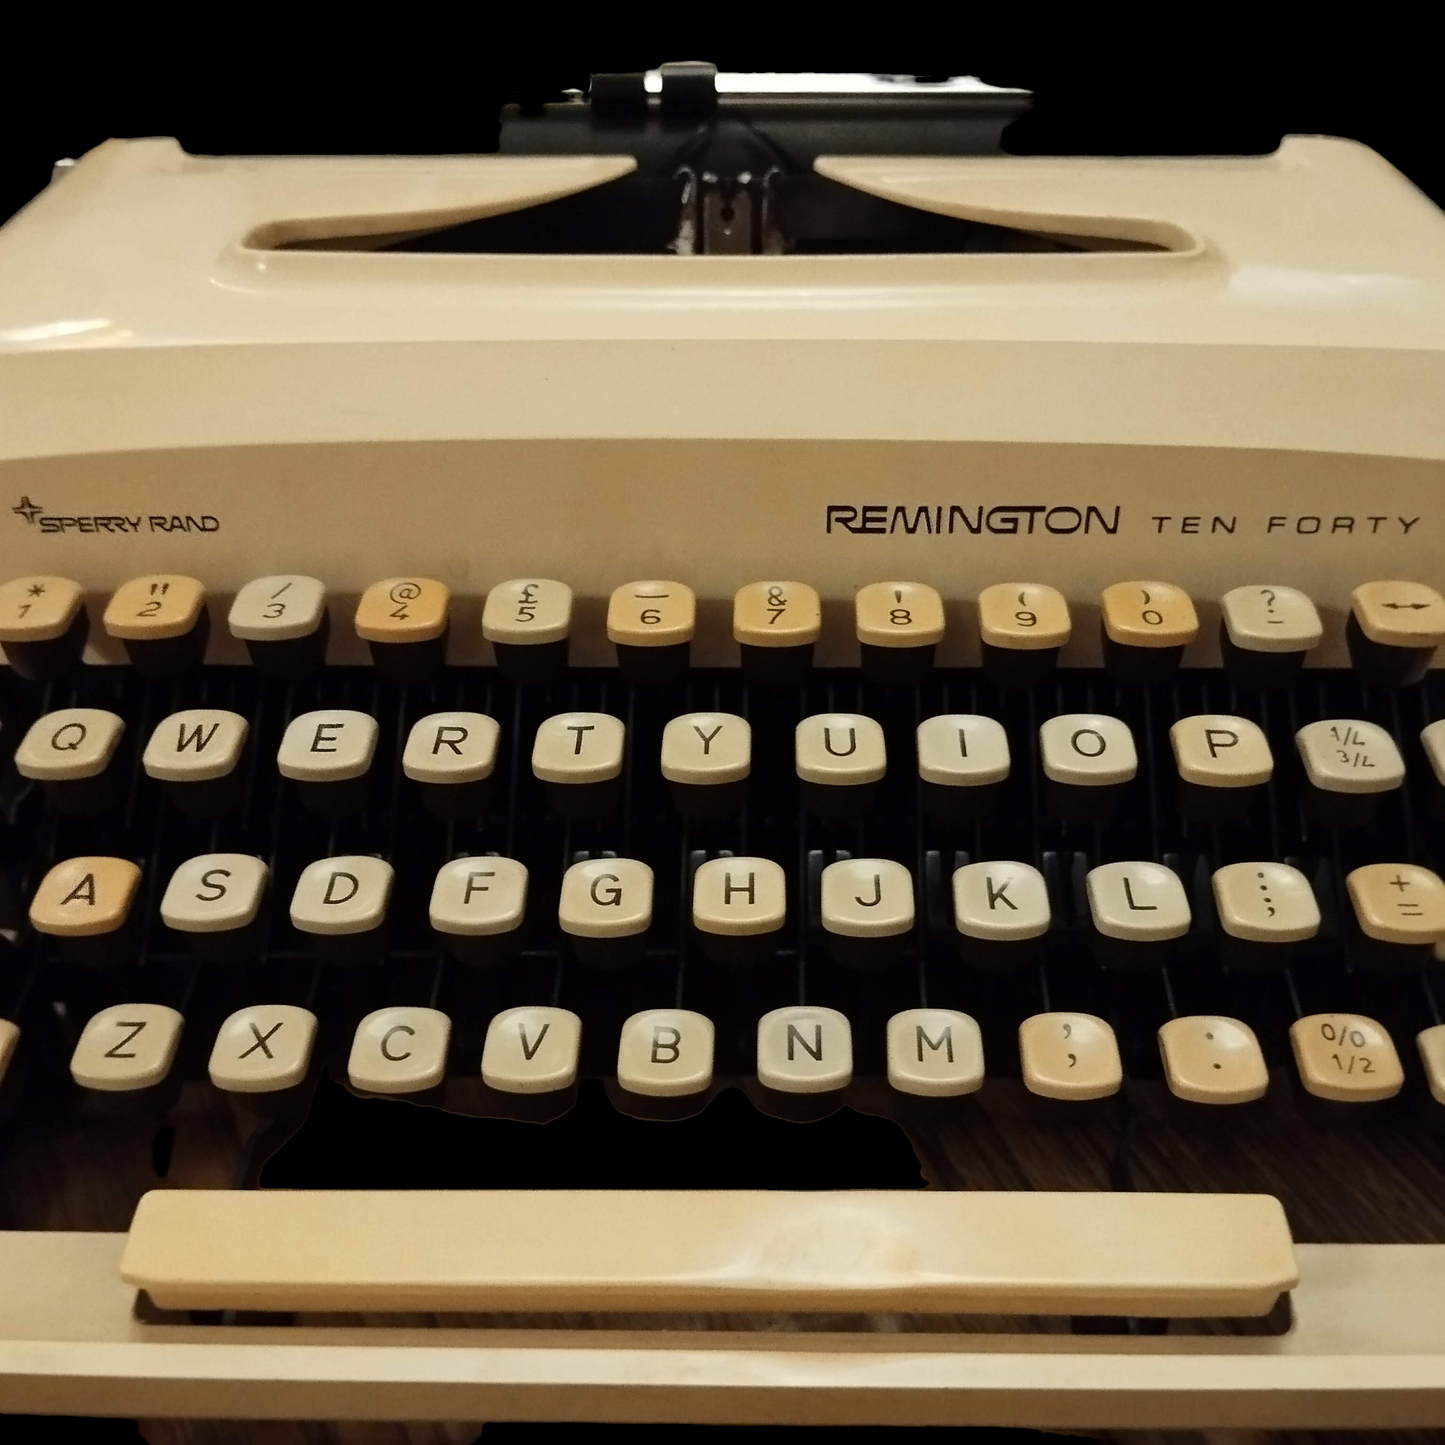 Image of Remington Ten Forty Sperry Rand Typewriter. Available at universaltypewritercompany.in